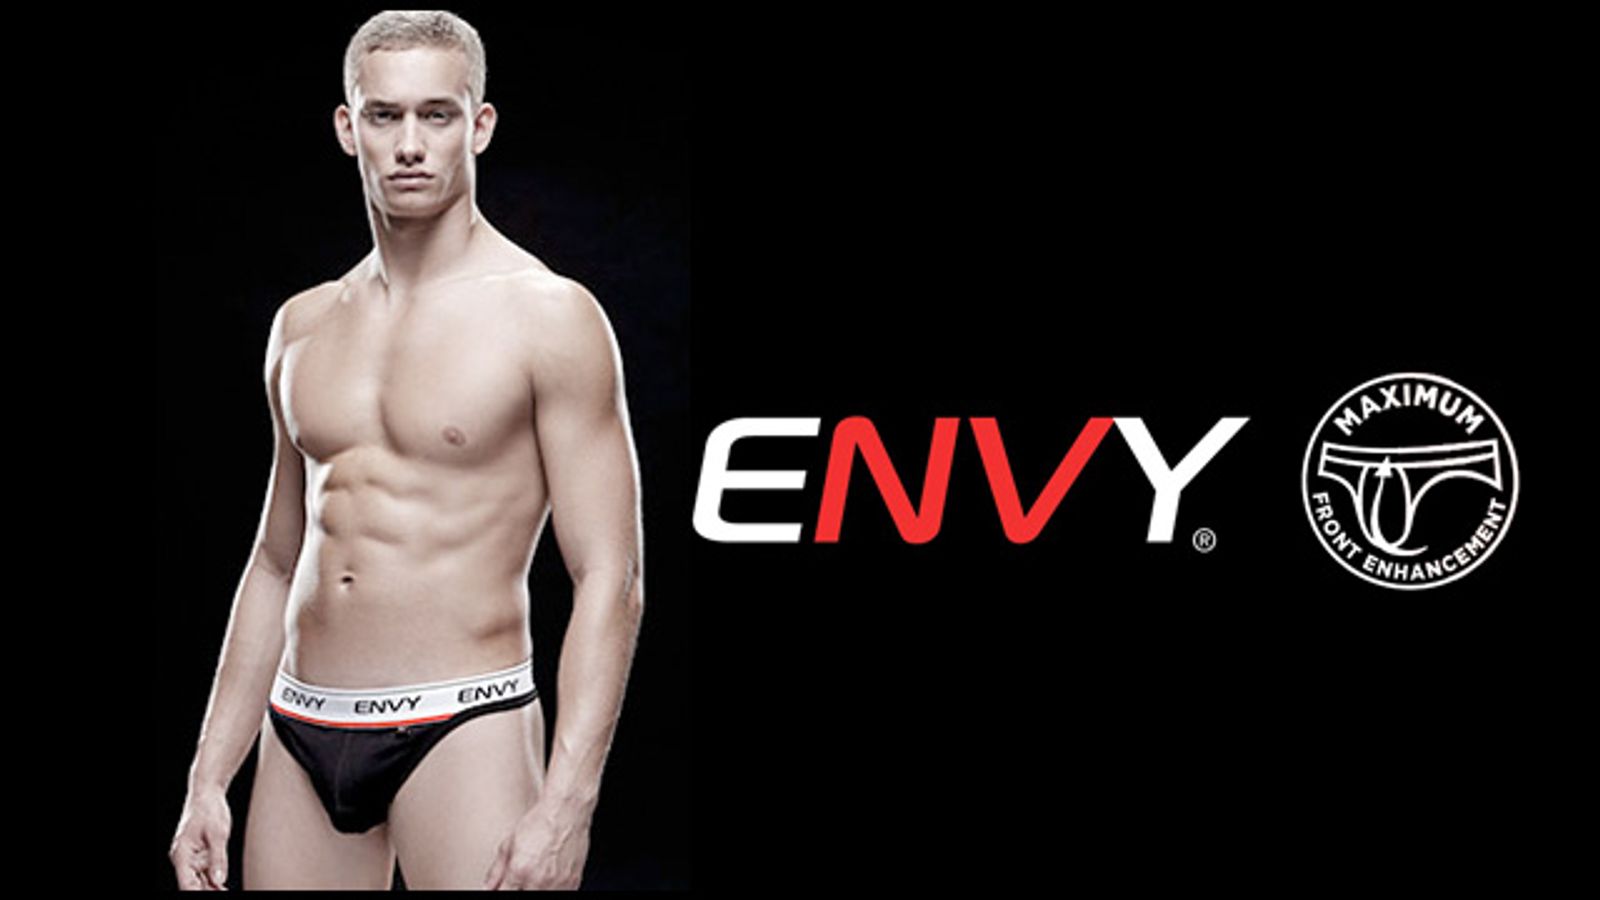 Envy Menswear’s Adds Enhancement Pocket To Boost Confidence